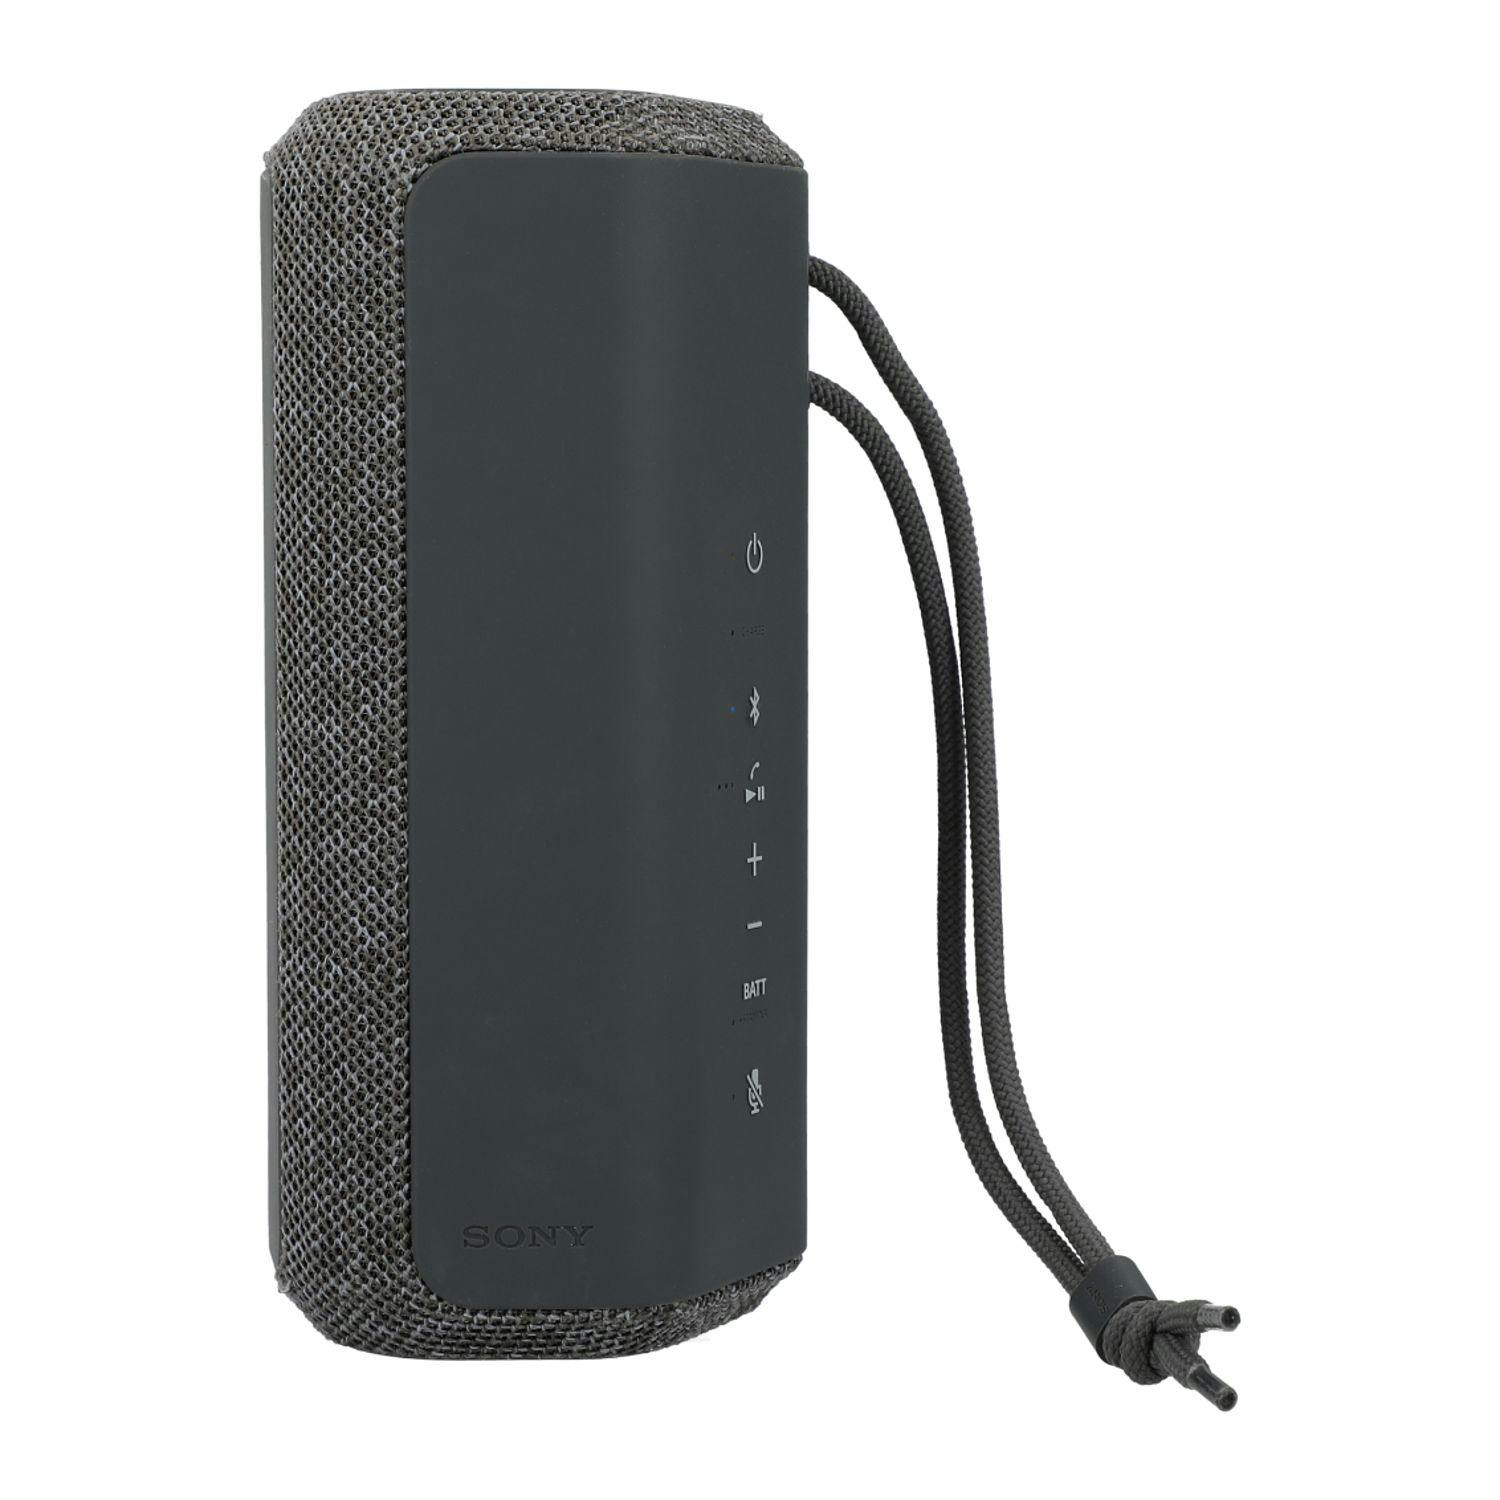 Sony XE200 Bluetooth Speaker - additional Image 2